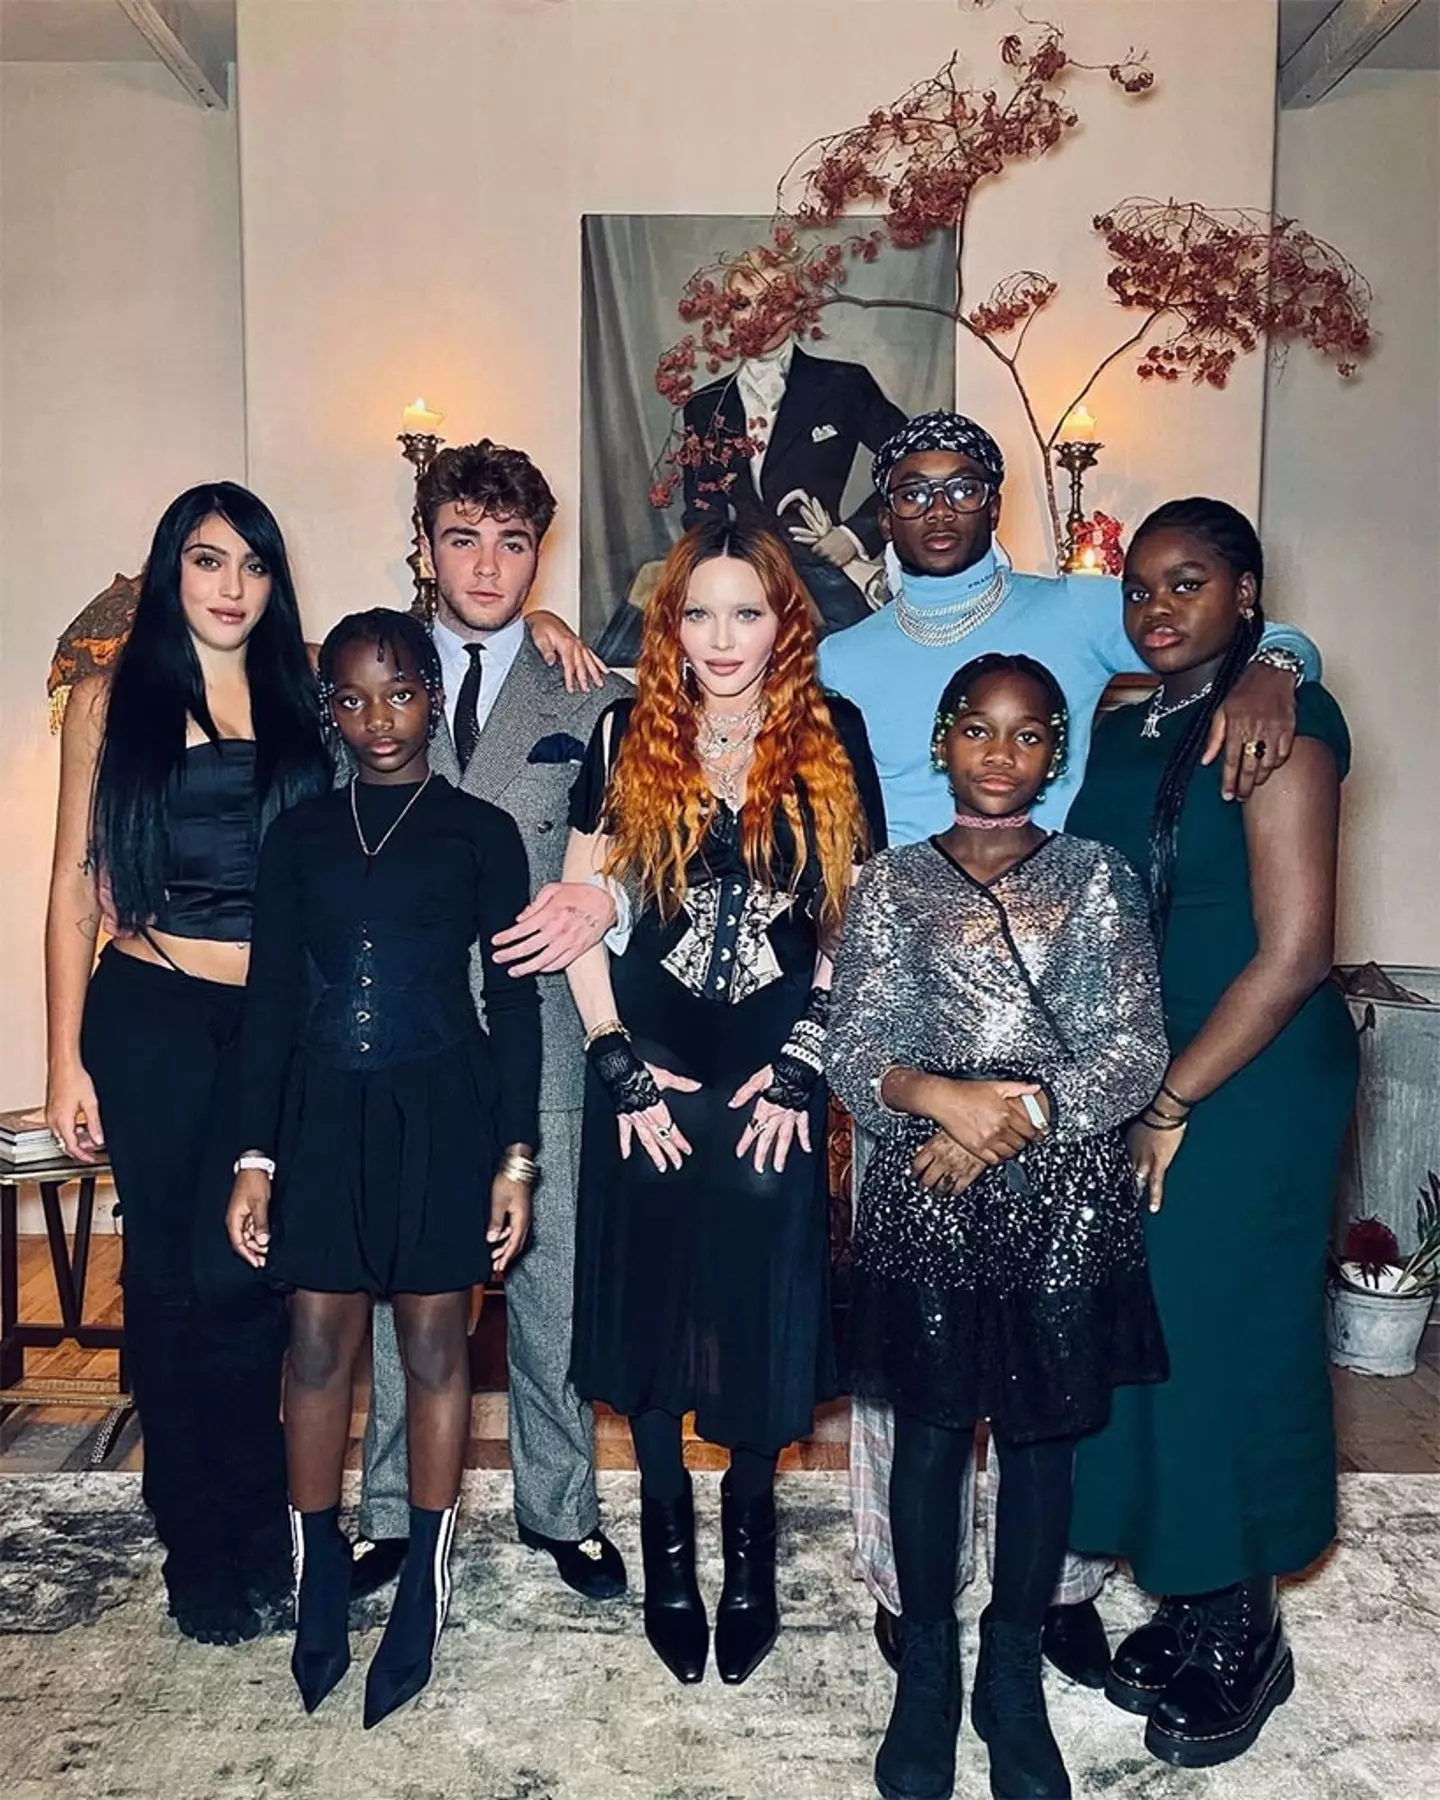 Madonna shared a rare snap with all her children at Thanksgiving last year.